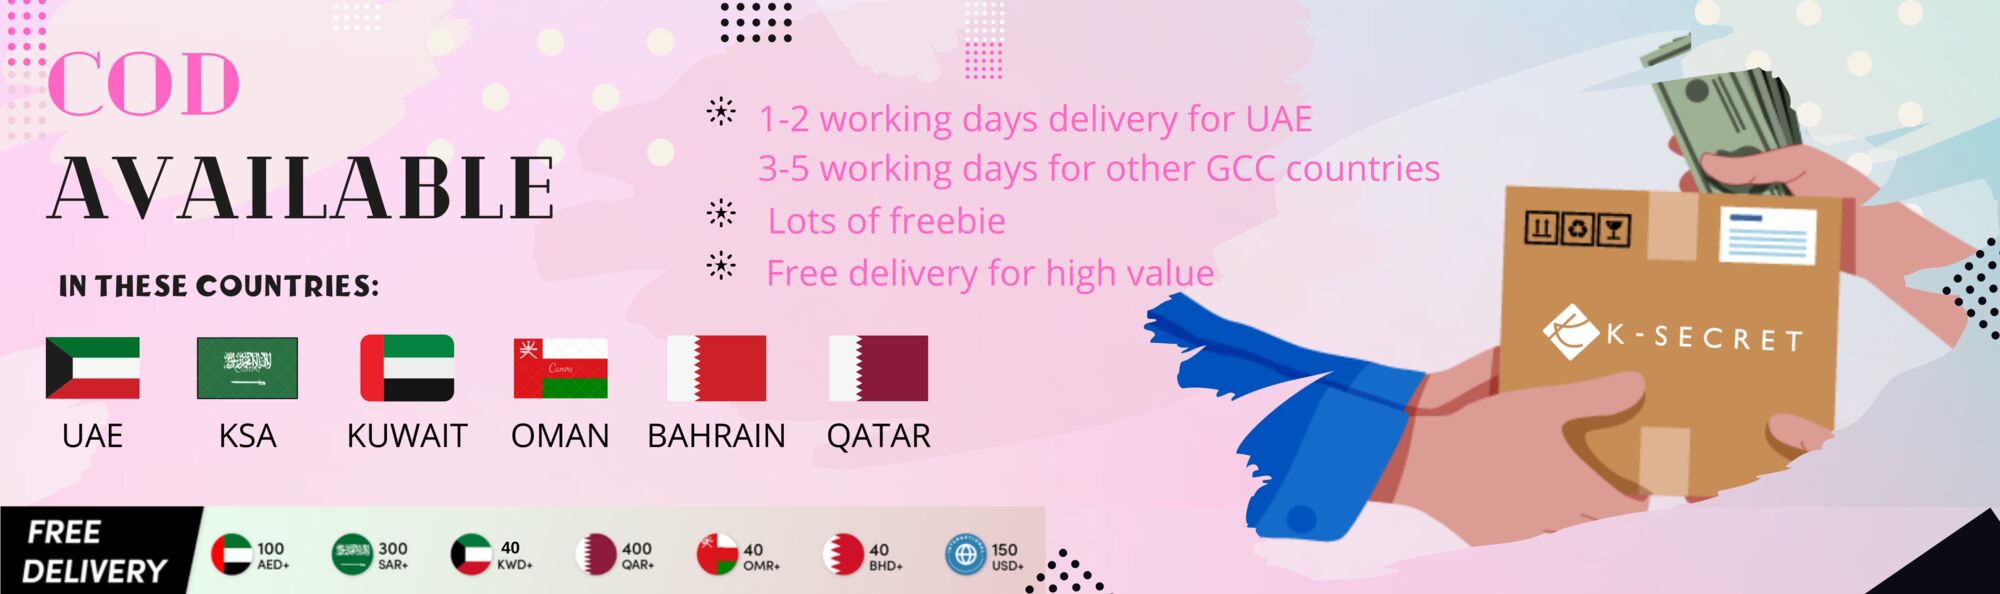 CoD % 1-2 working days delivery for UAE AVAI LAB LE 3-5 working days for other GCC countries * Lots of freebie Free delivery for high value h IN THESE COUNTRIES: KSA KUWAIT OMAN BAHRAIN QATAR N C: x Co Do o Do O QARe OMR o3 